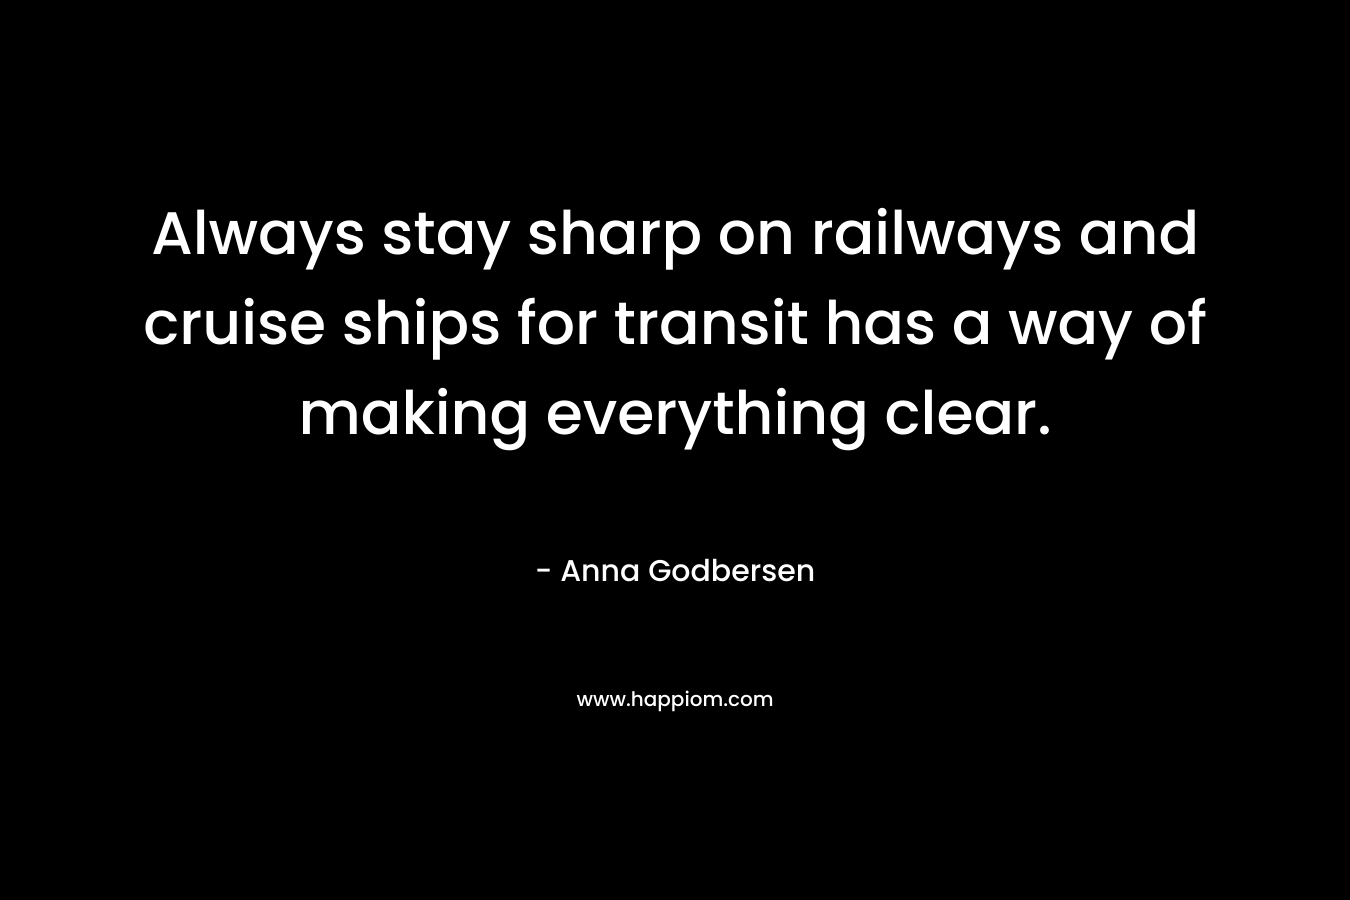 Always stay sharp on railways and cruise ships for transit has a way of making everything clear.